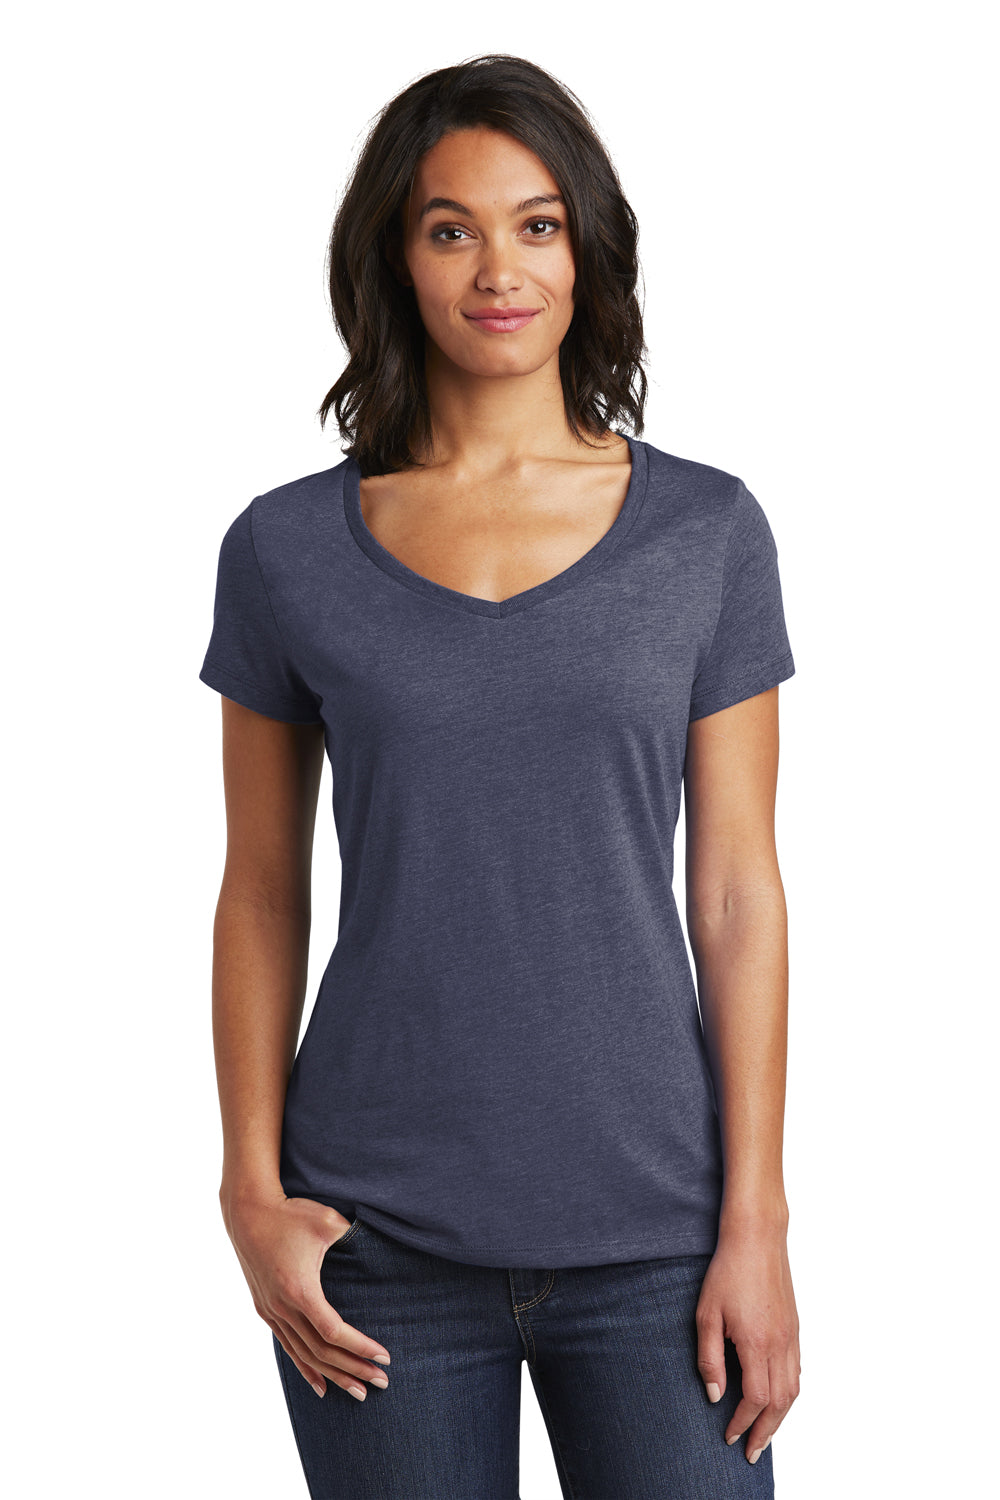 District DT6503 Womens Very Important Short Sleeve V-Neck T-Shirt Heather Navy Blue Front